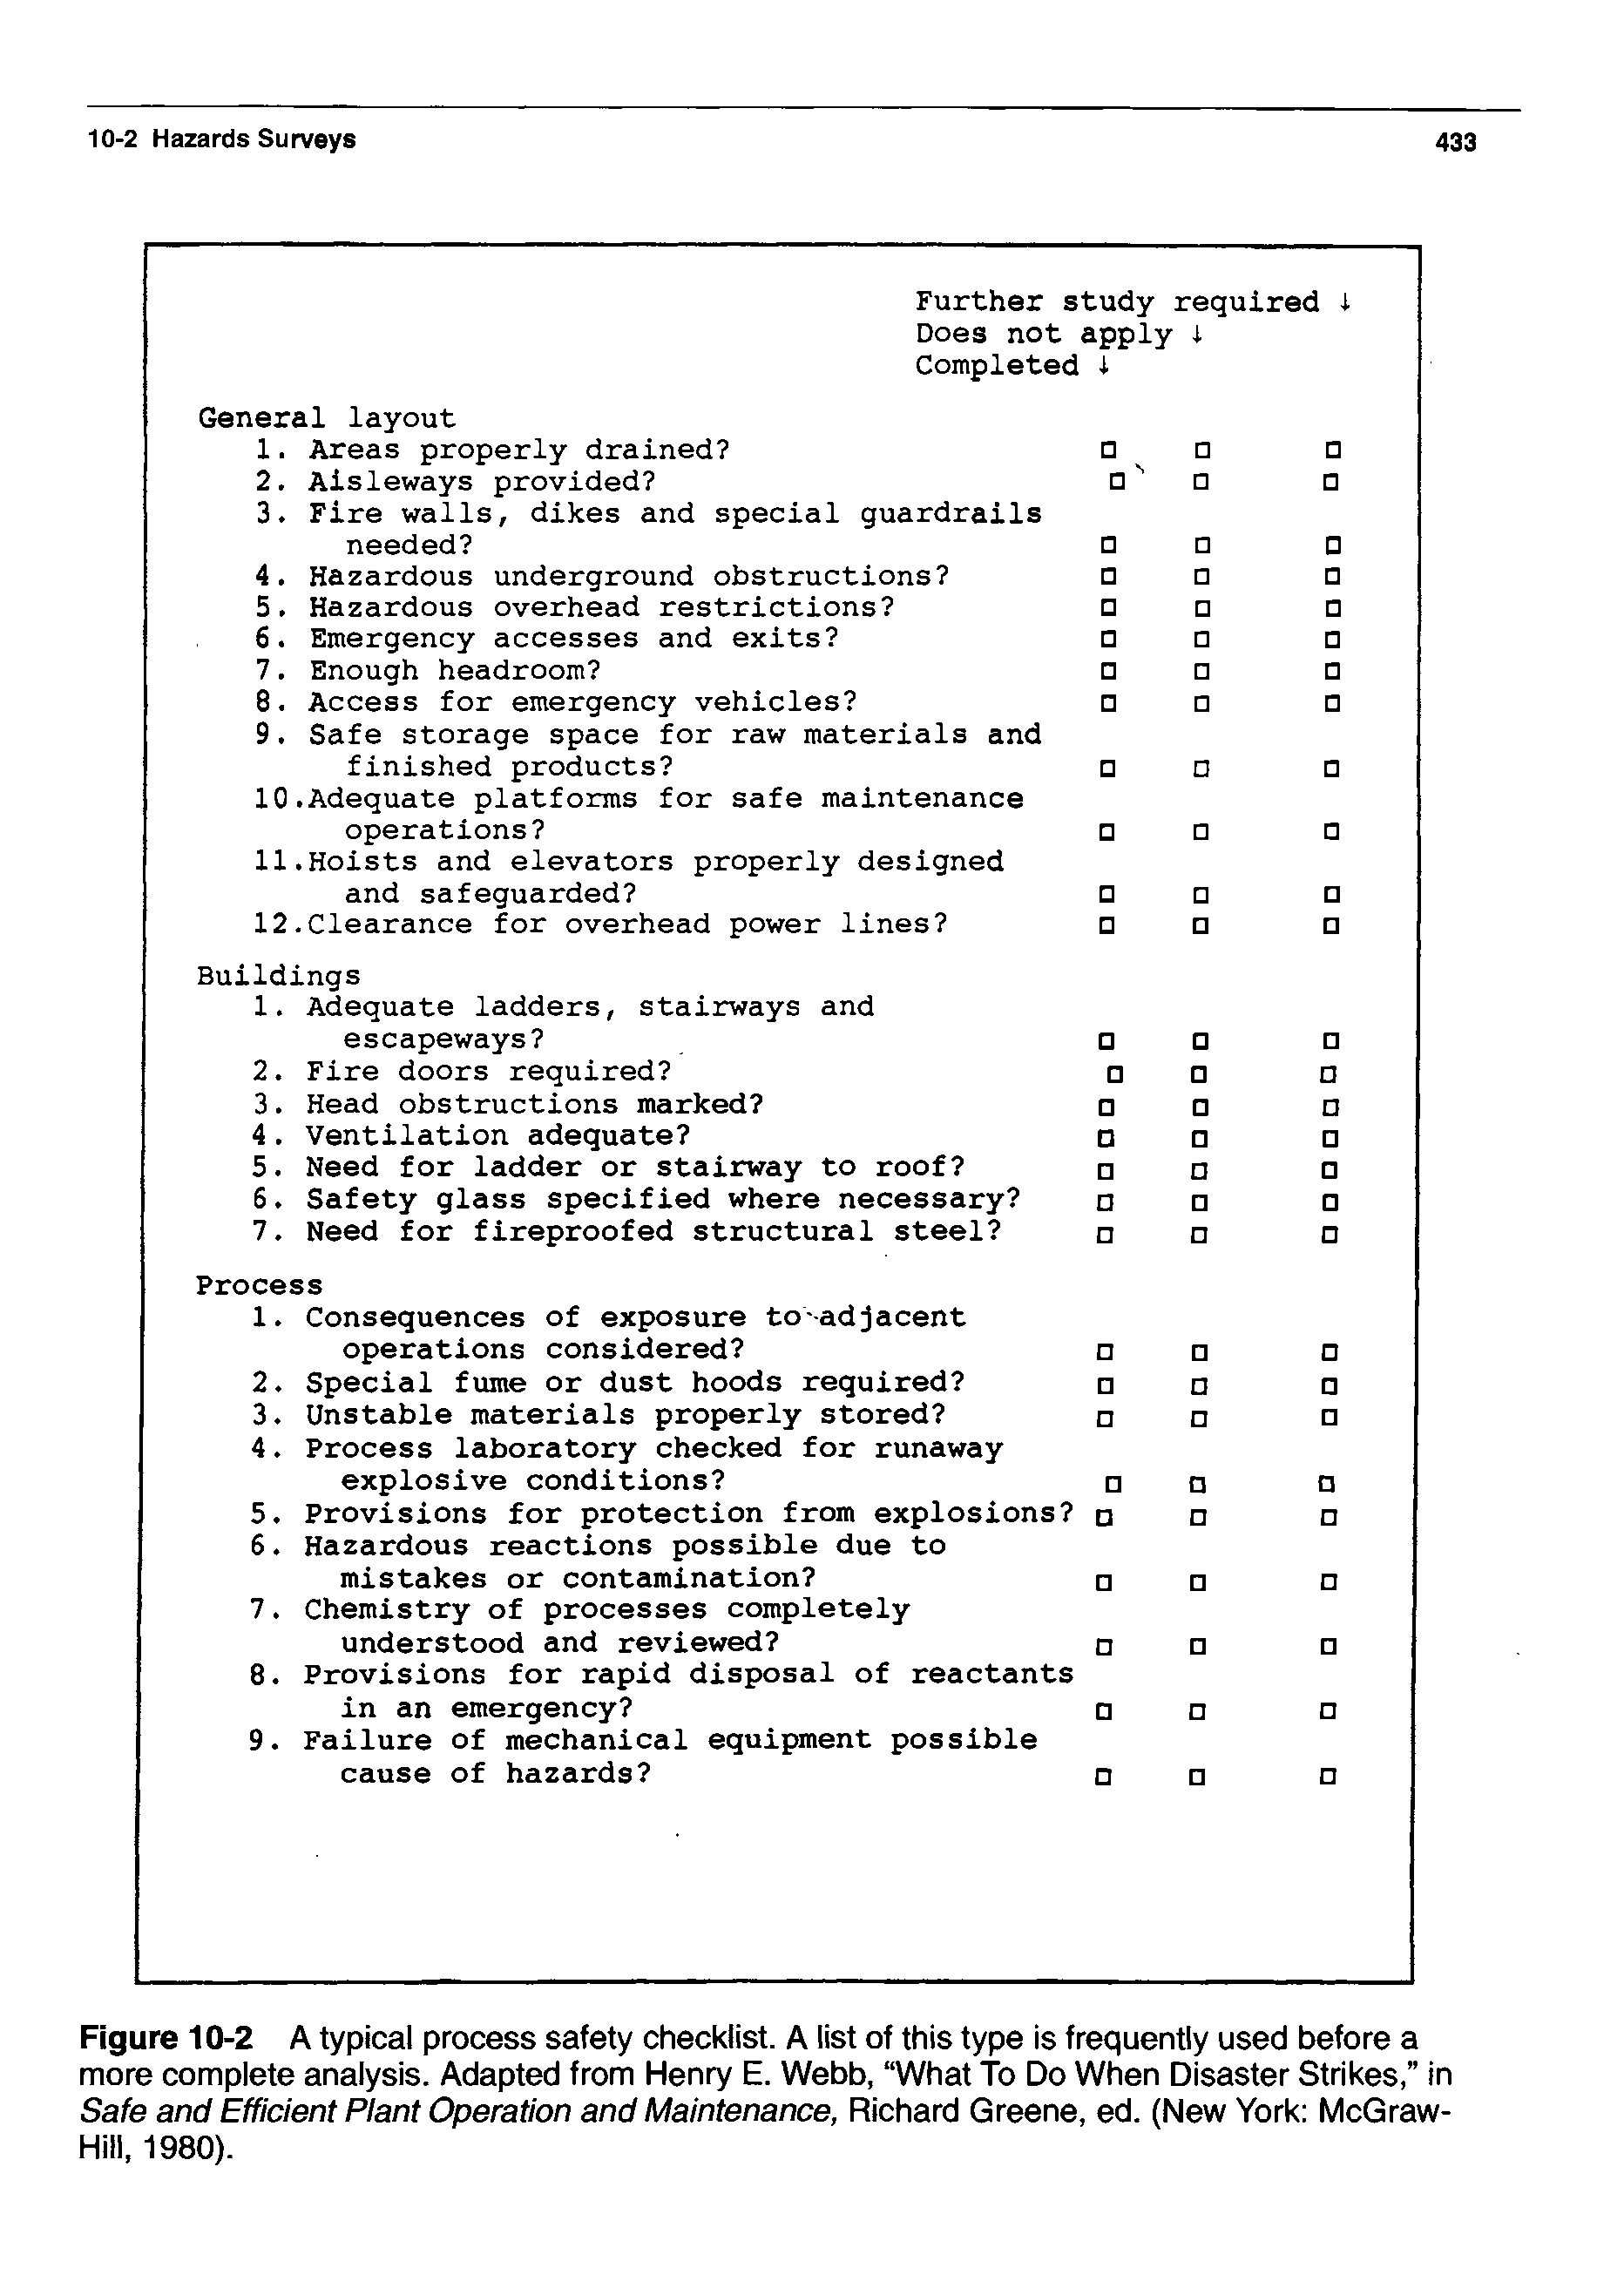 Figure 10-2 A typical process safety checklist. A list of this type is frequently used before a more complete analysis. Adapted from Henry E. Webb, What To Do When Disaster Strikes, in Safe and Efficient Plant Operation and Maintenance, Richard Greene, ed. (New York McGraw-Hill, 1980).